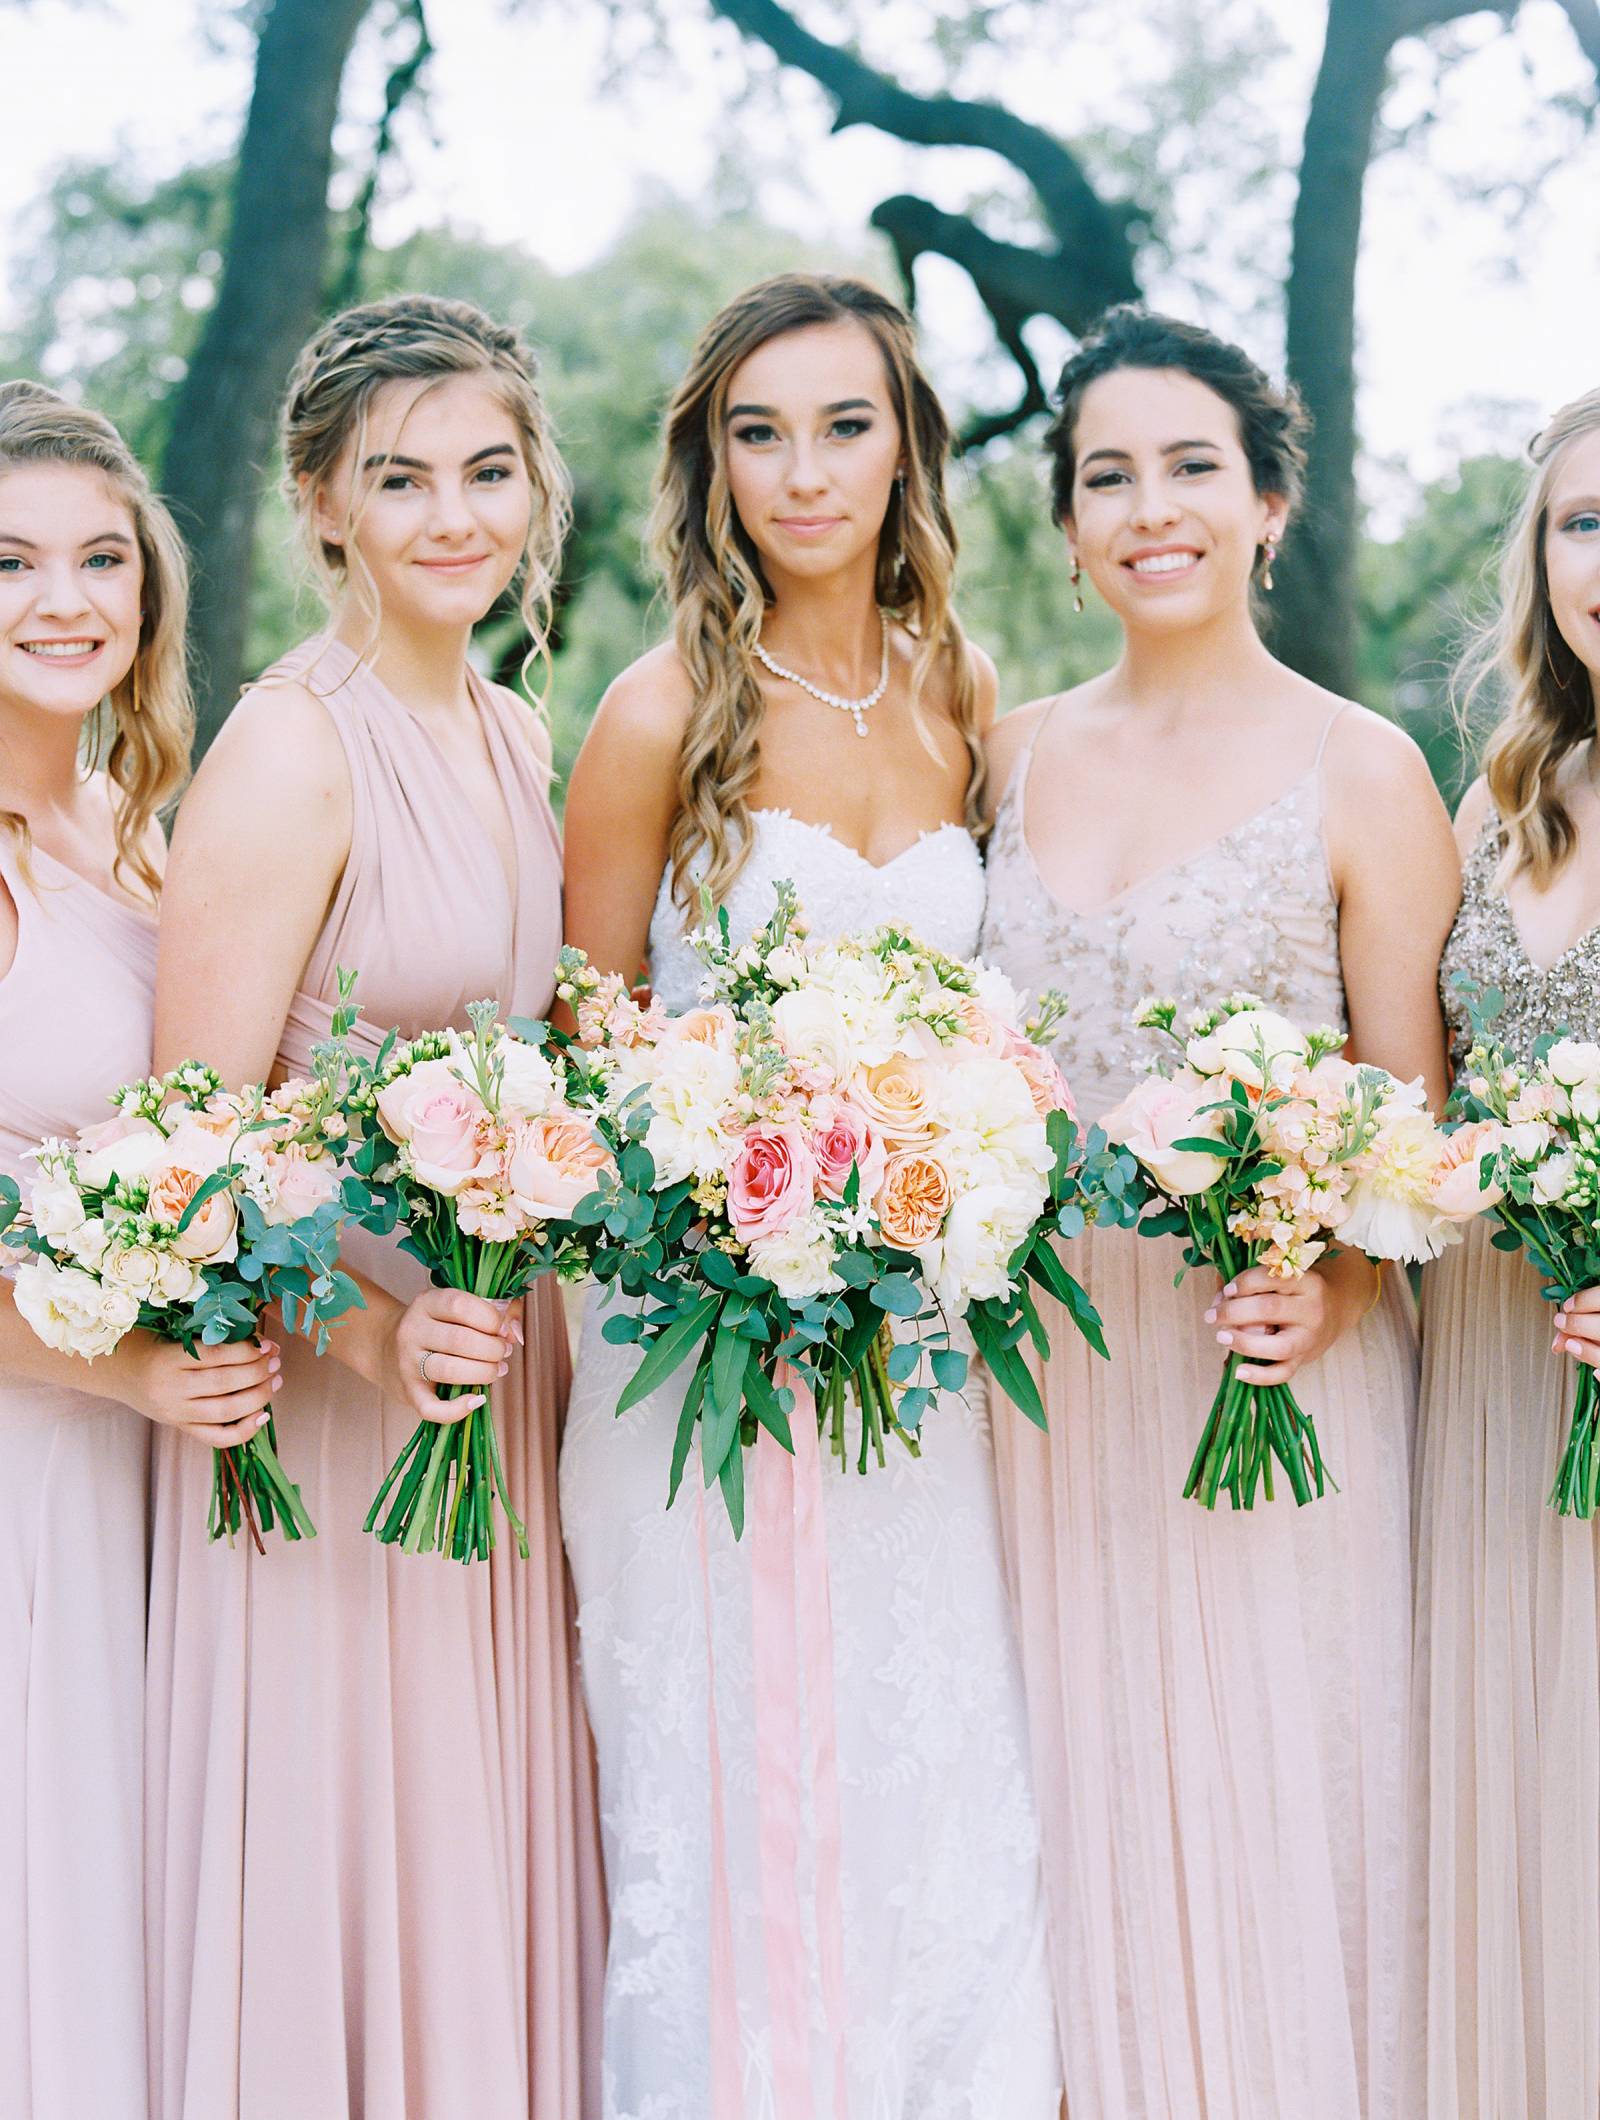 Industrial Romance in the Texas Hill Country | Texas Real Weddings